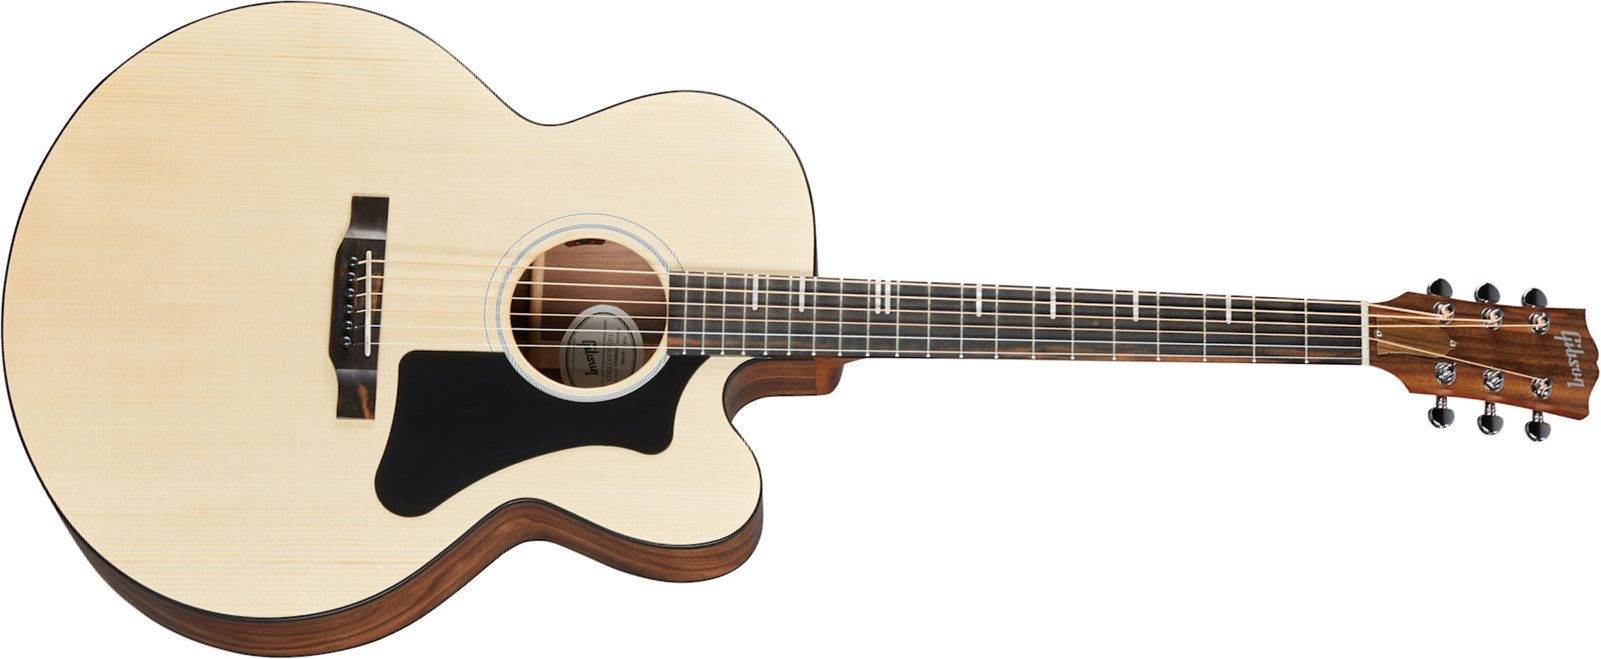 Gibson G-200 Ec Jumbo Modern Cw Epicea Noyer Wal Eb - Natural Satin - Electro acoustic guitar - Main picture